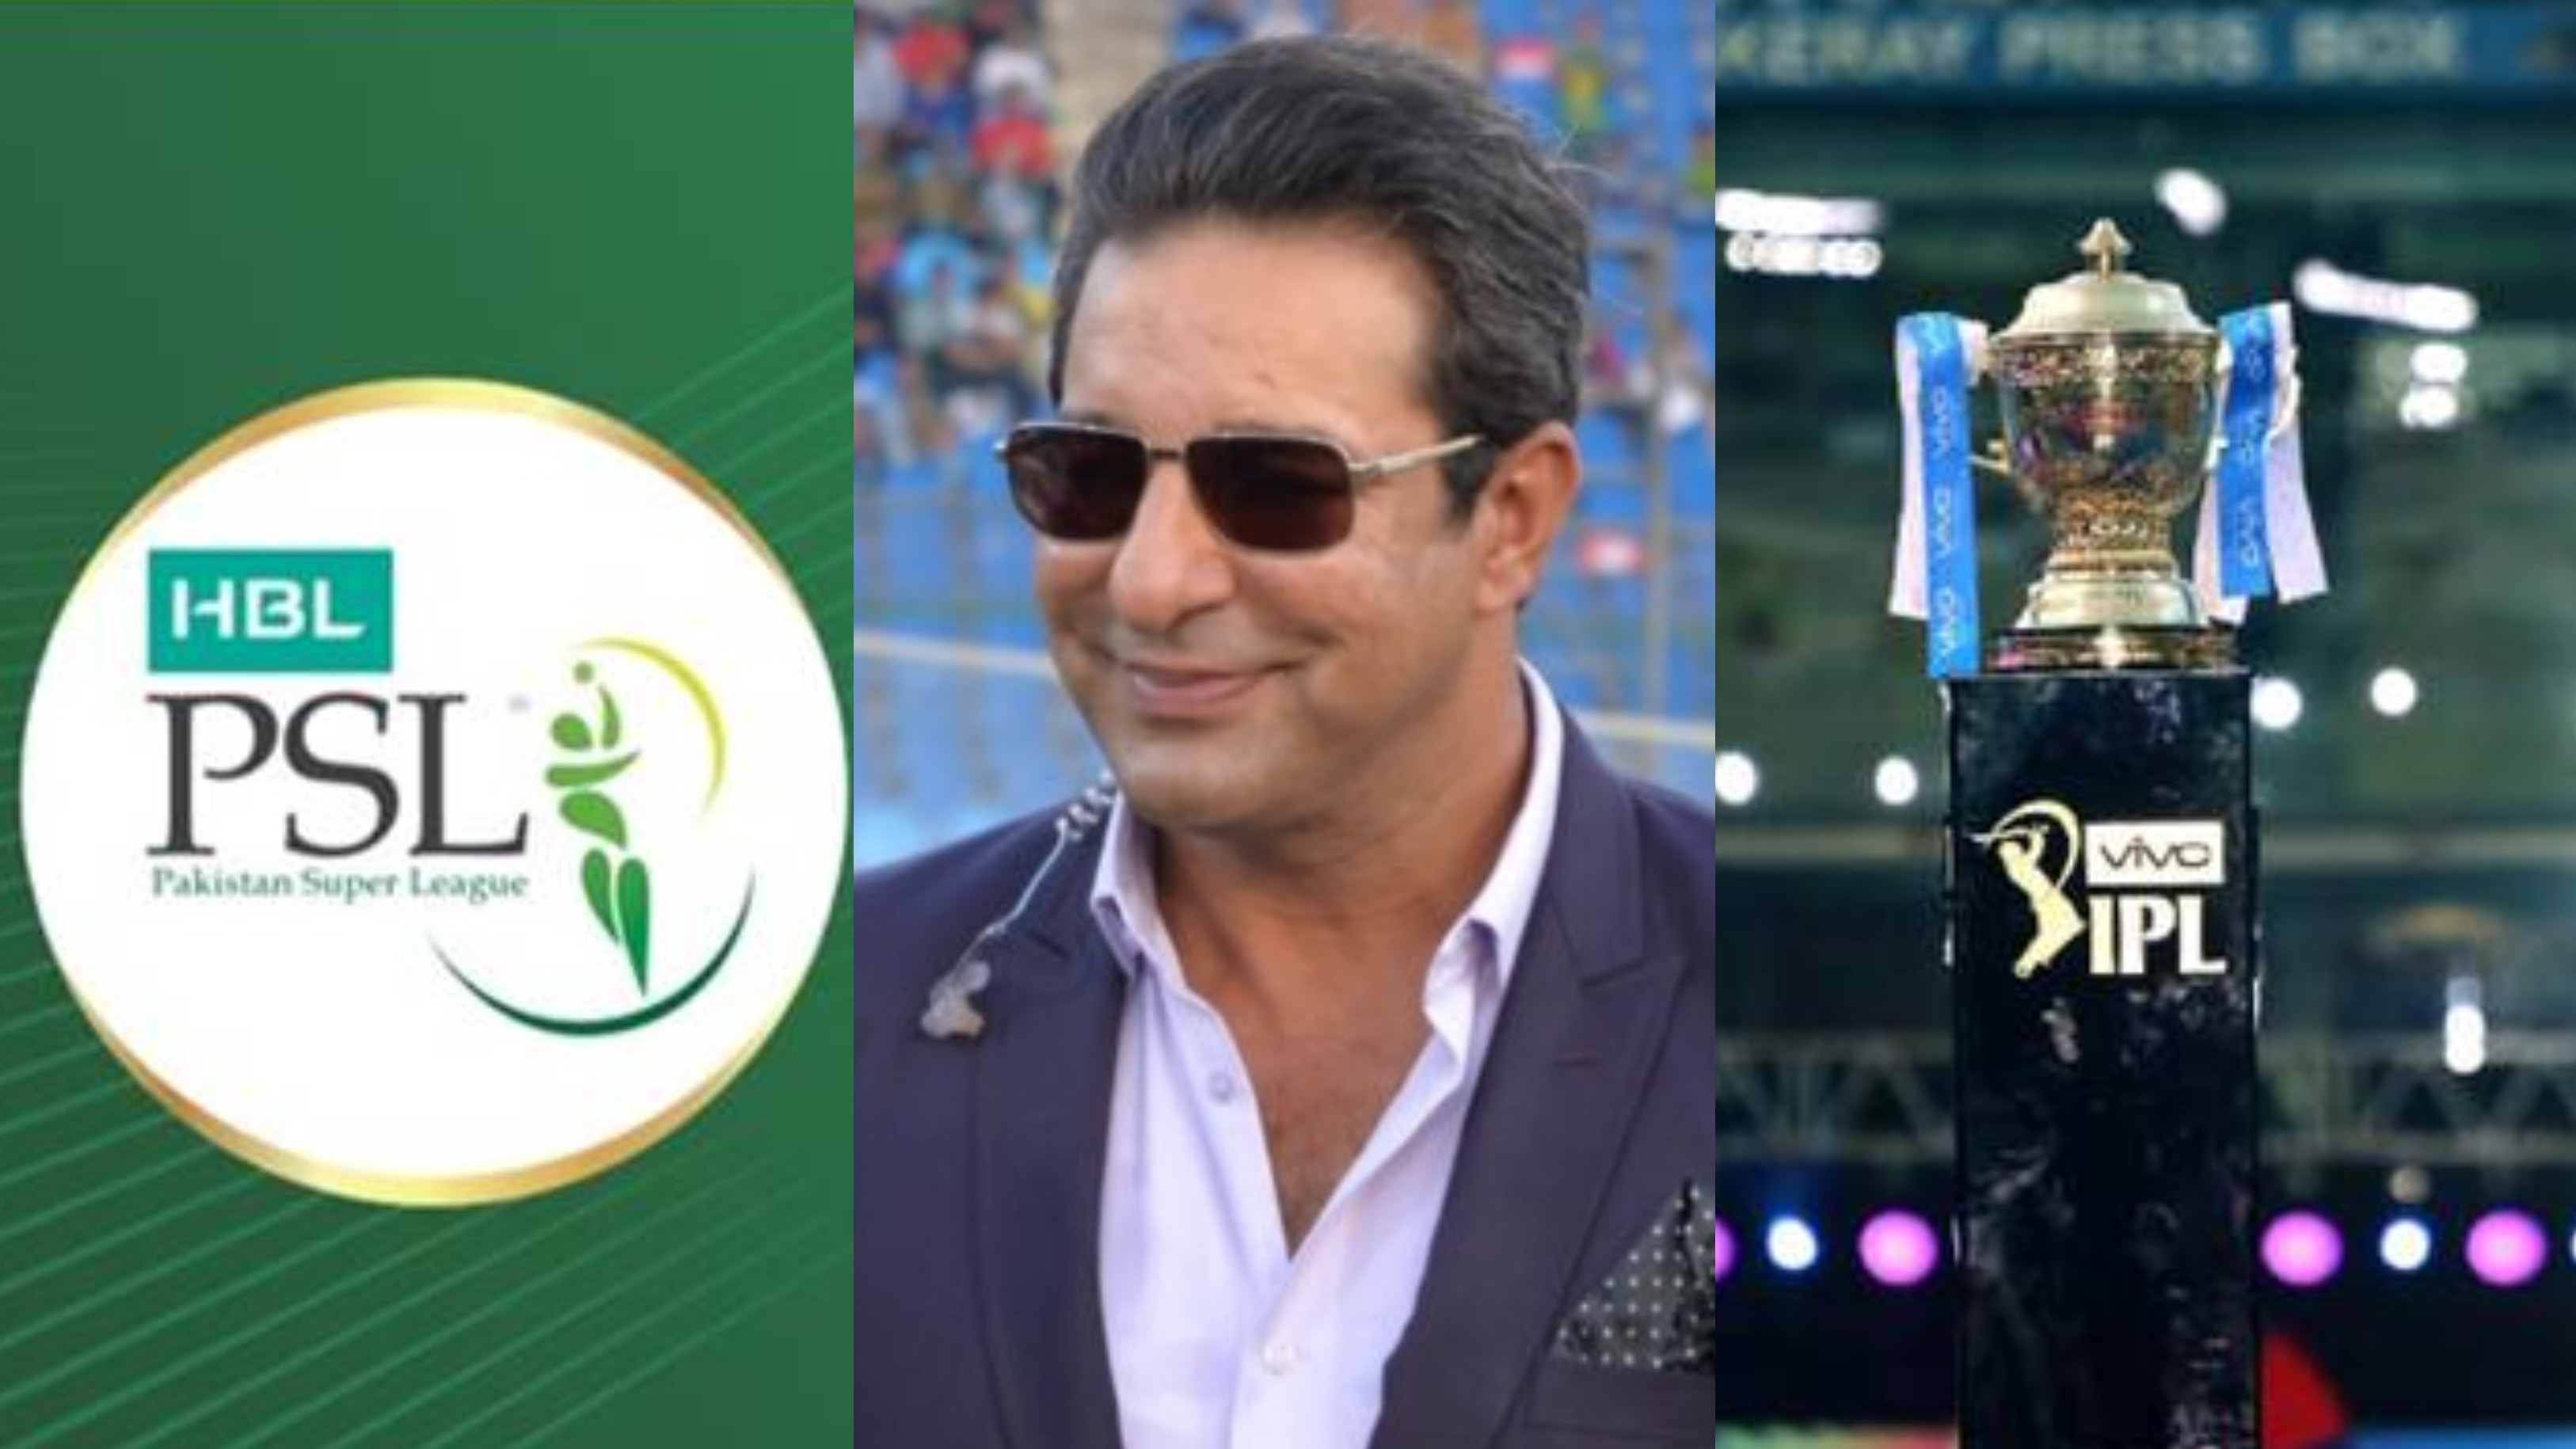 WATCH: Comparisons not fair, but bowling quality better in PSL than IPL, says Wasim Akram